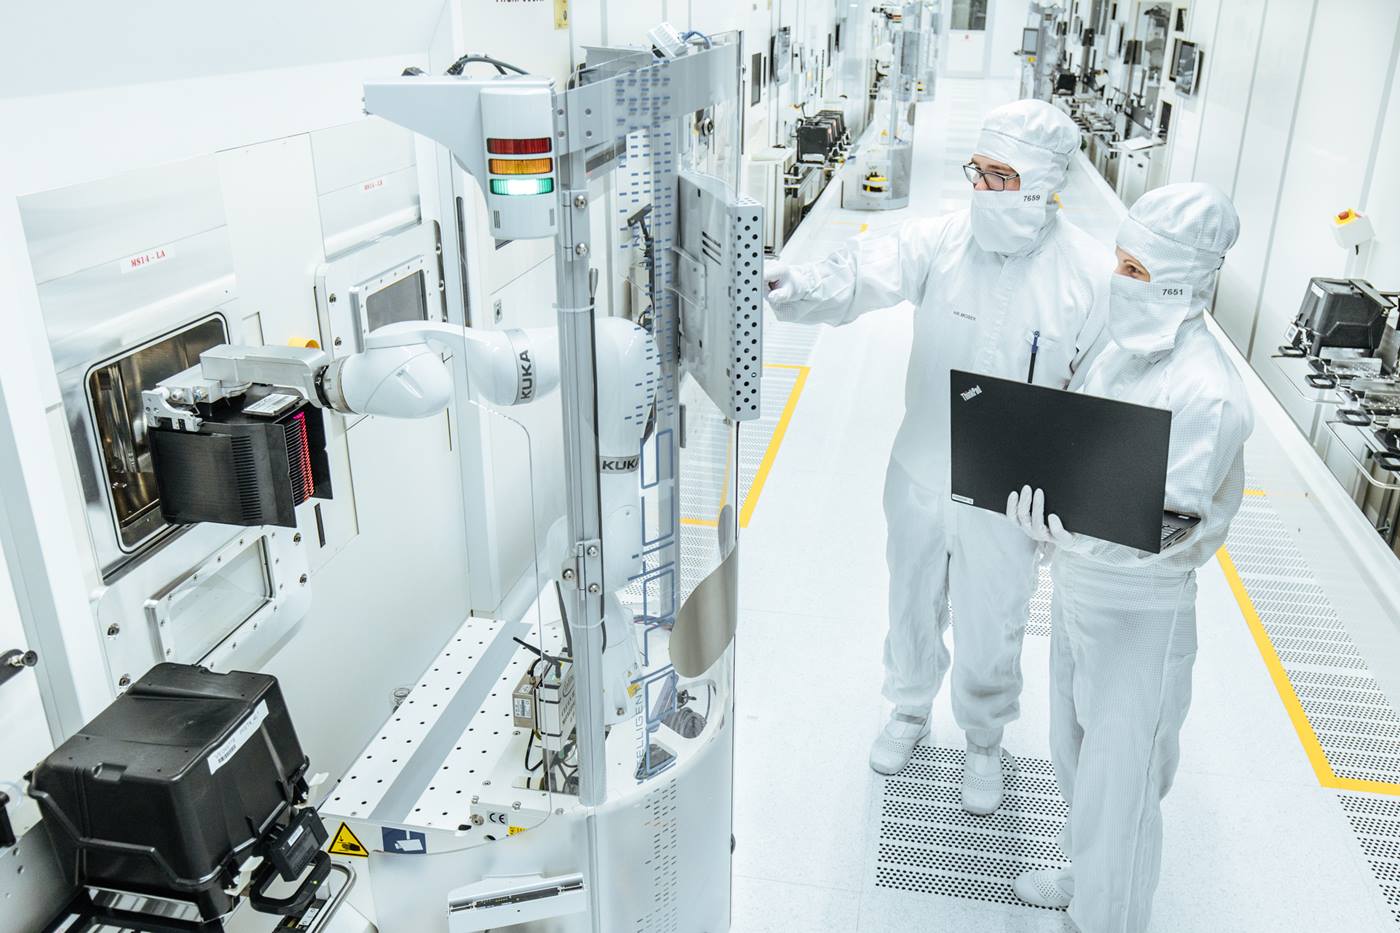 mobile-cleanroom-cobot-transports-electronic-components-and-sensitive-wafers